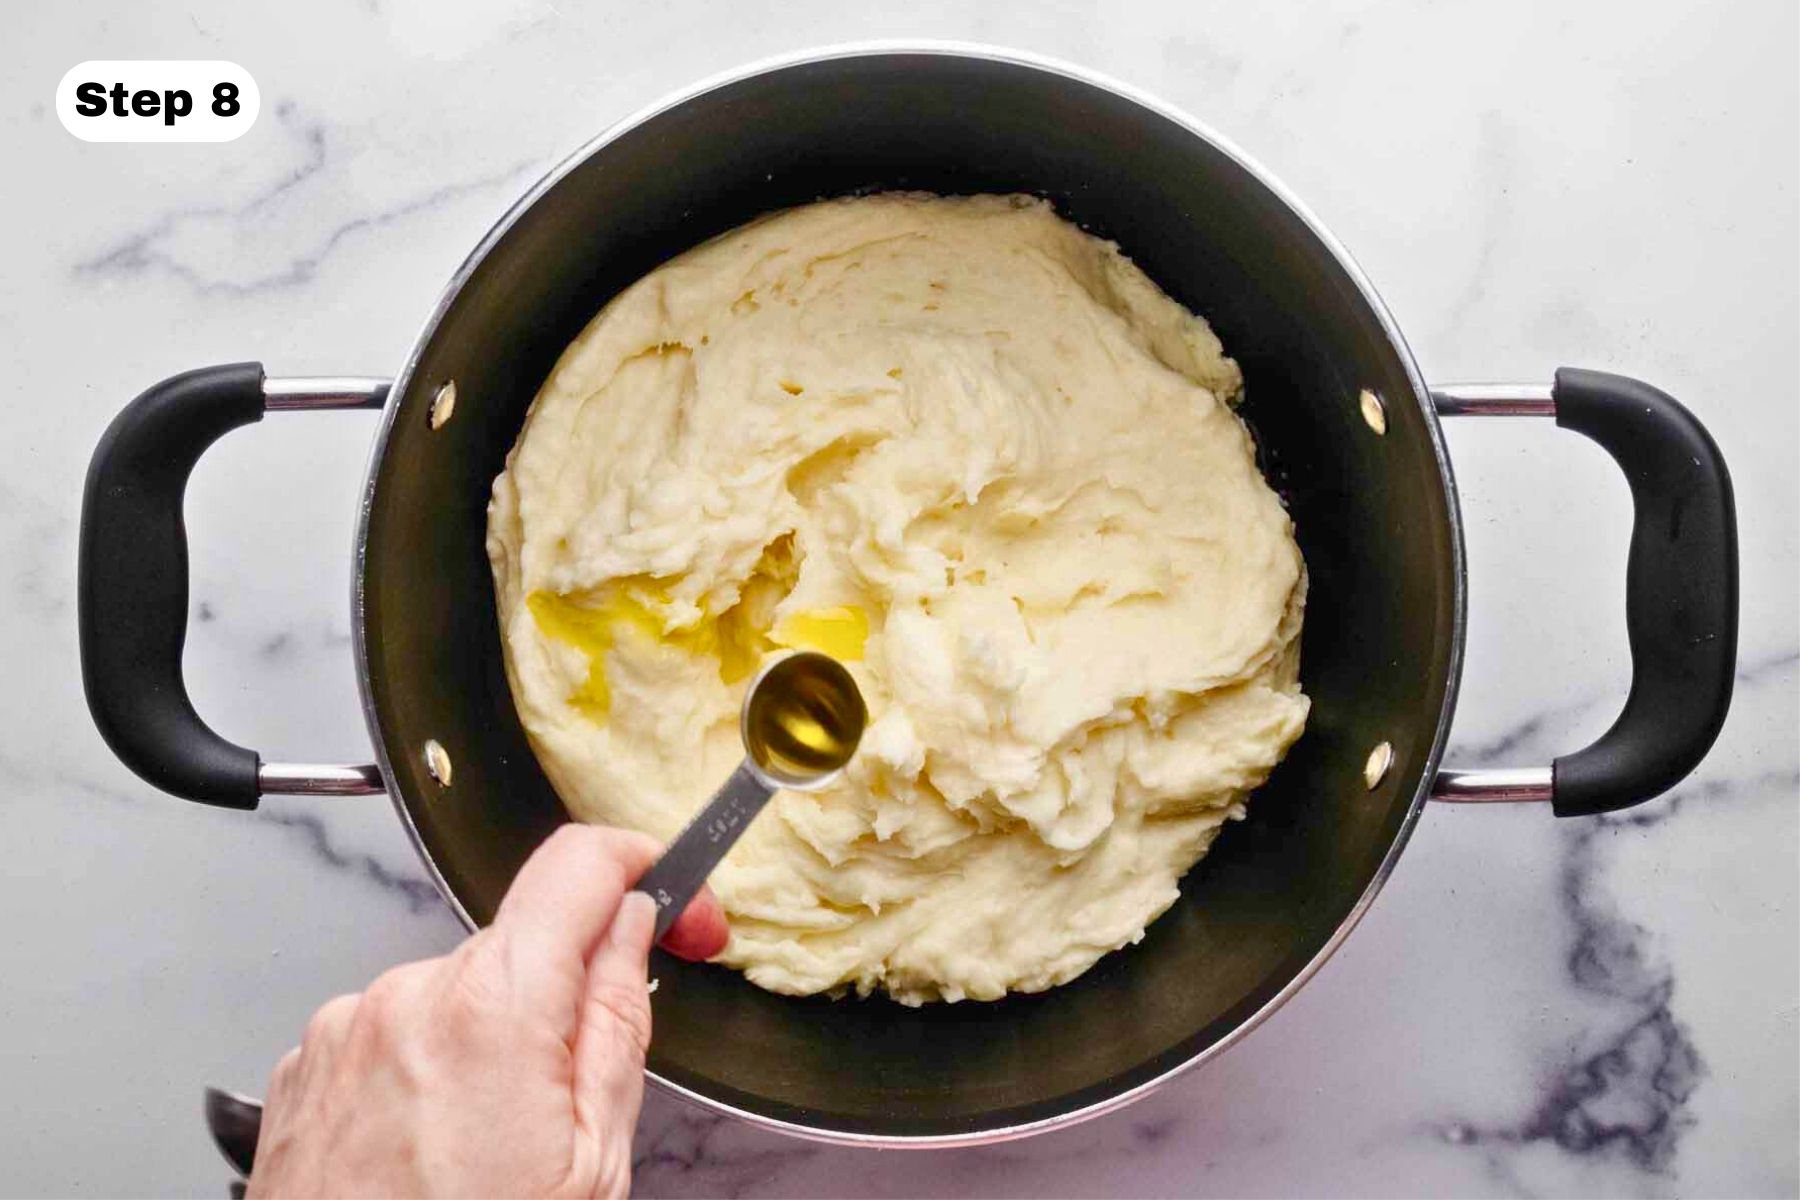 Truffle oil being added to mashed potatoes in a large pot.